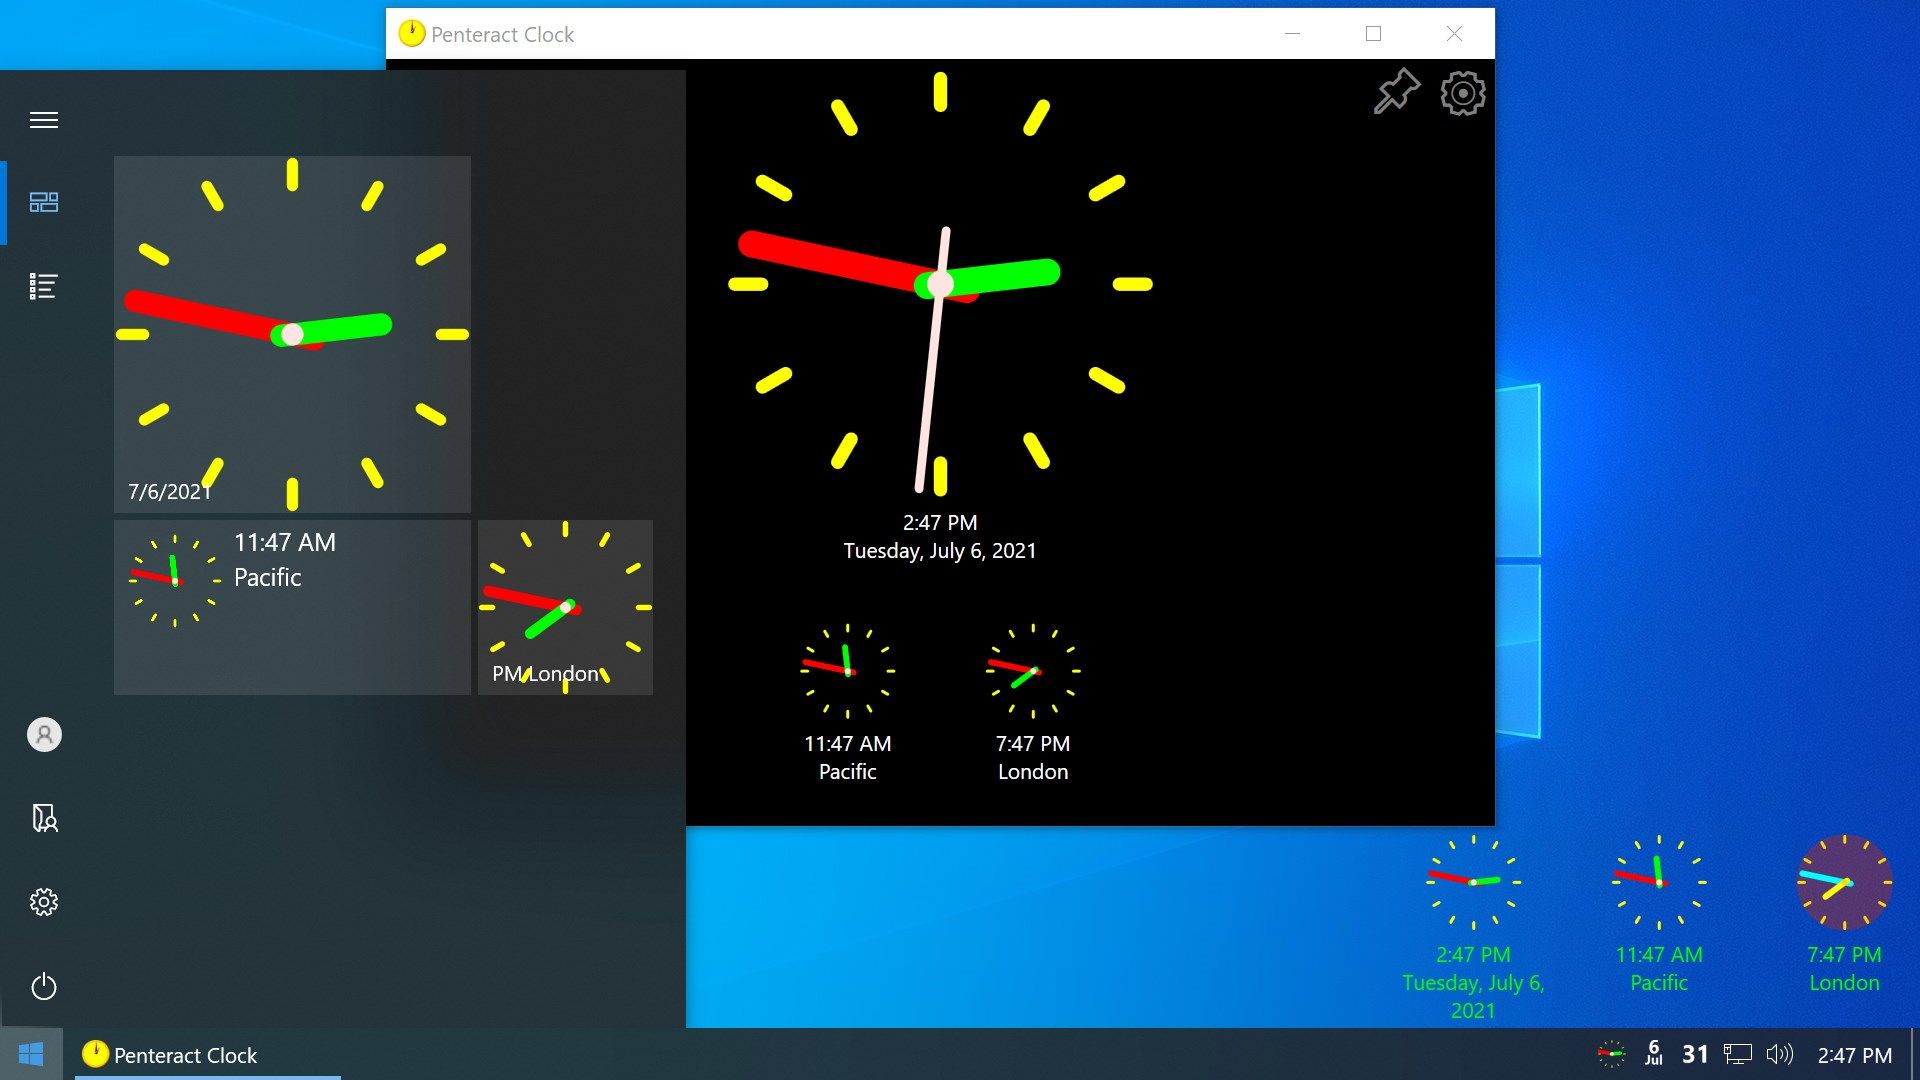 Main Window, Start-Menu Tiles of various sizes, Mini Window with several clocks, and in the Systray (Notification Area) - Clock, Seconds, and Date.